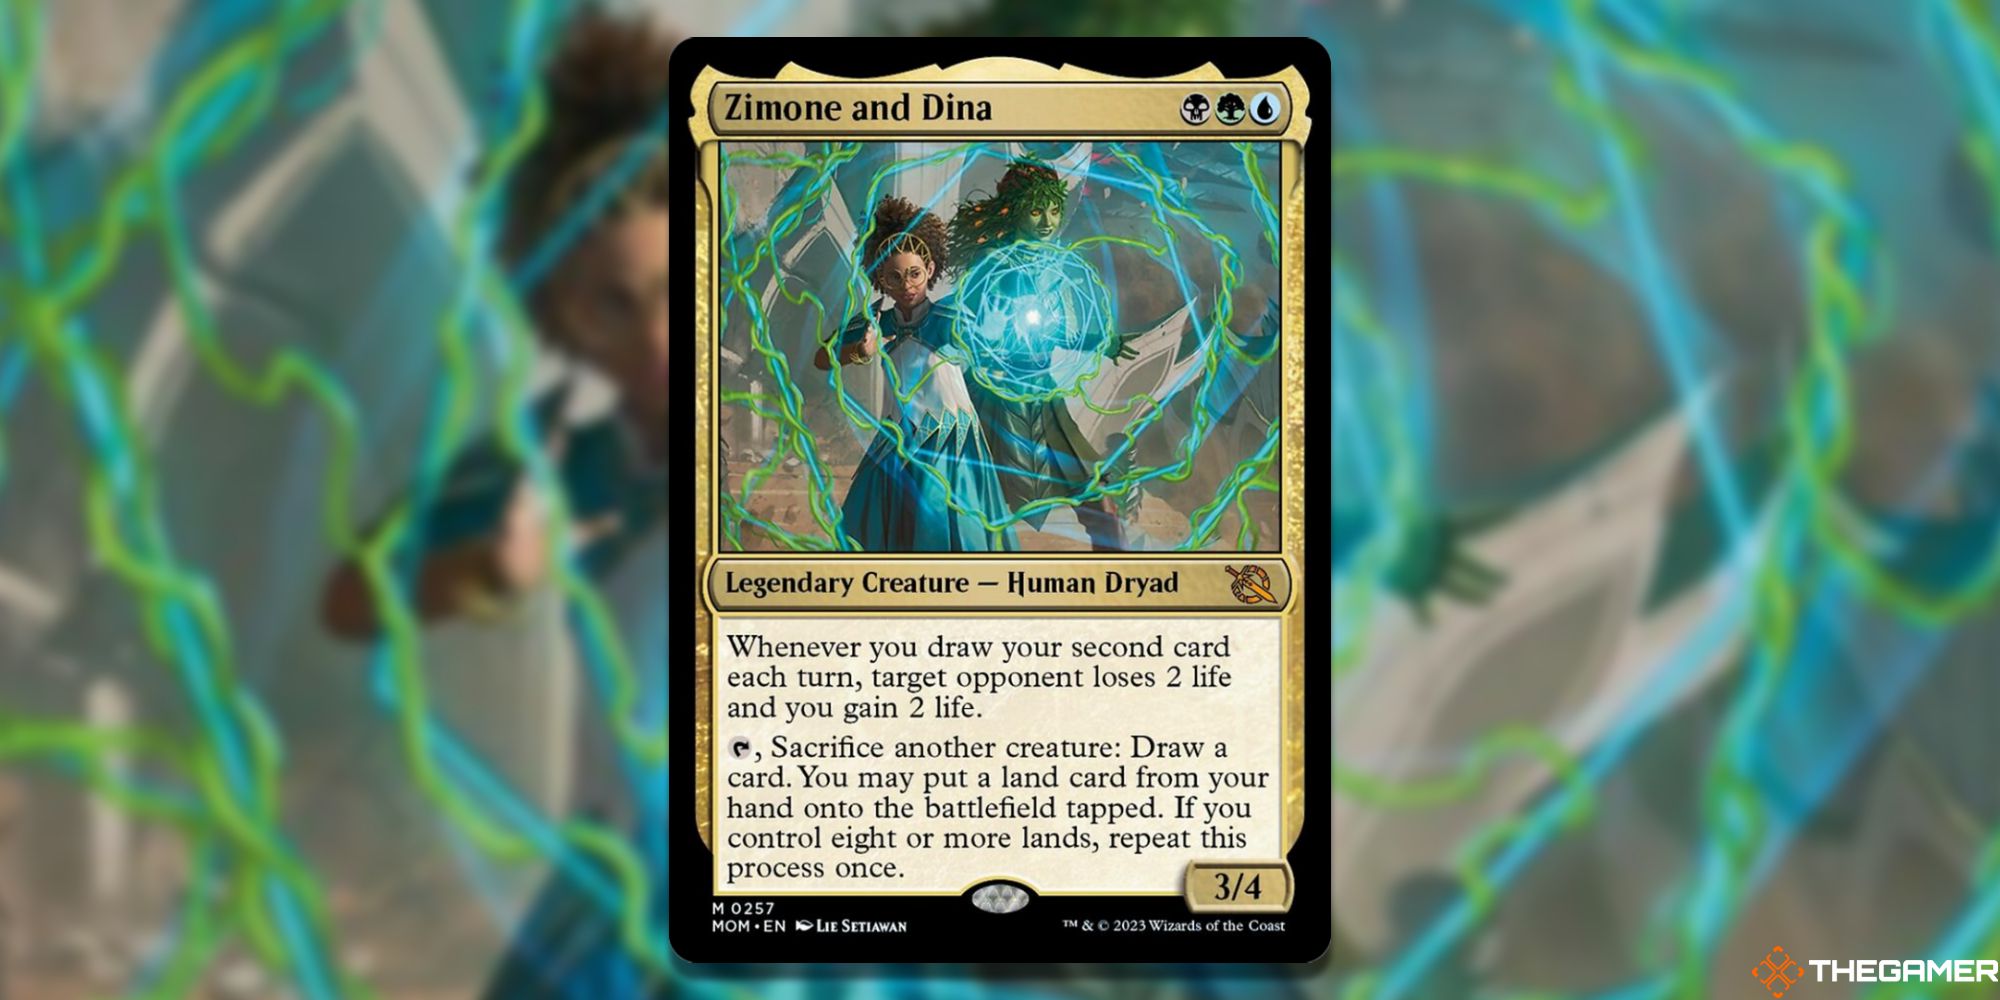 Image of the Zimone and Dina card in Magic: The Gathering, with art by Lie Setiawan